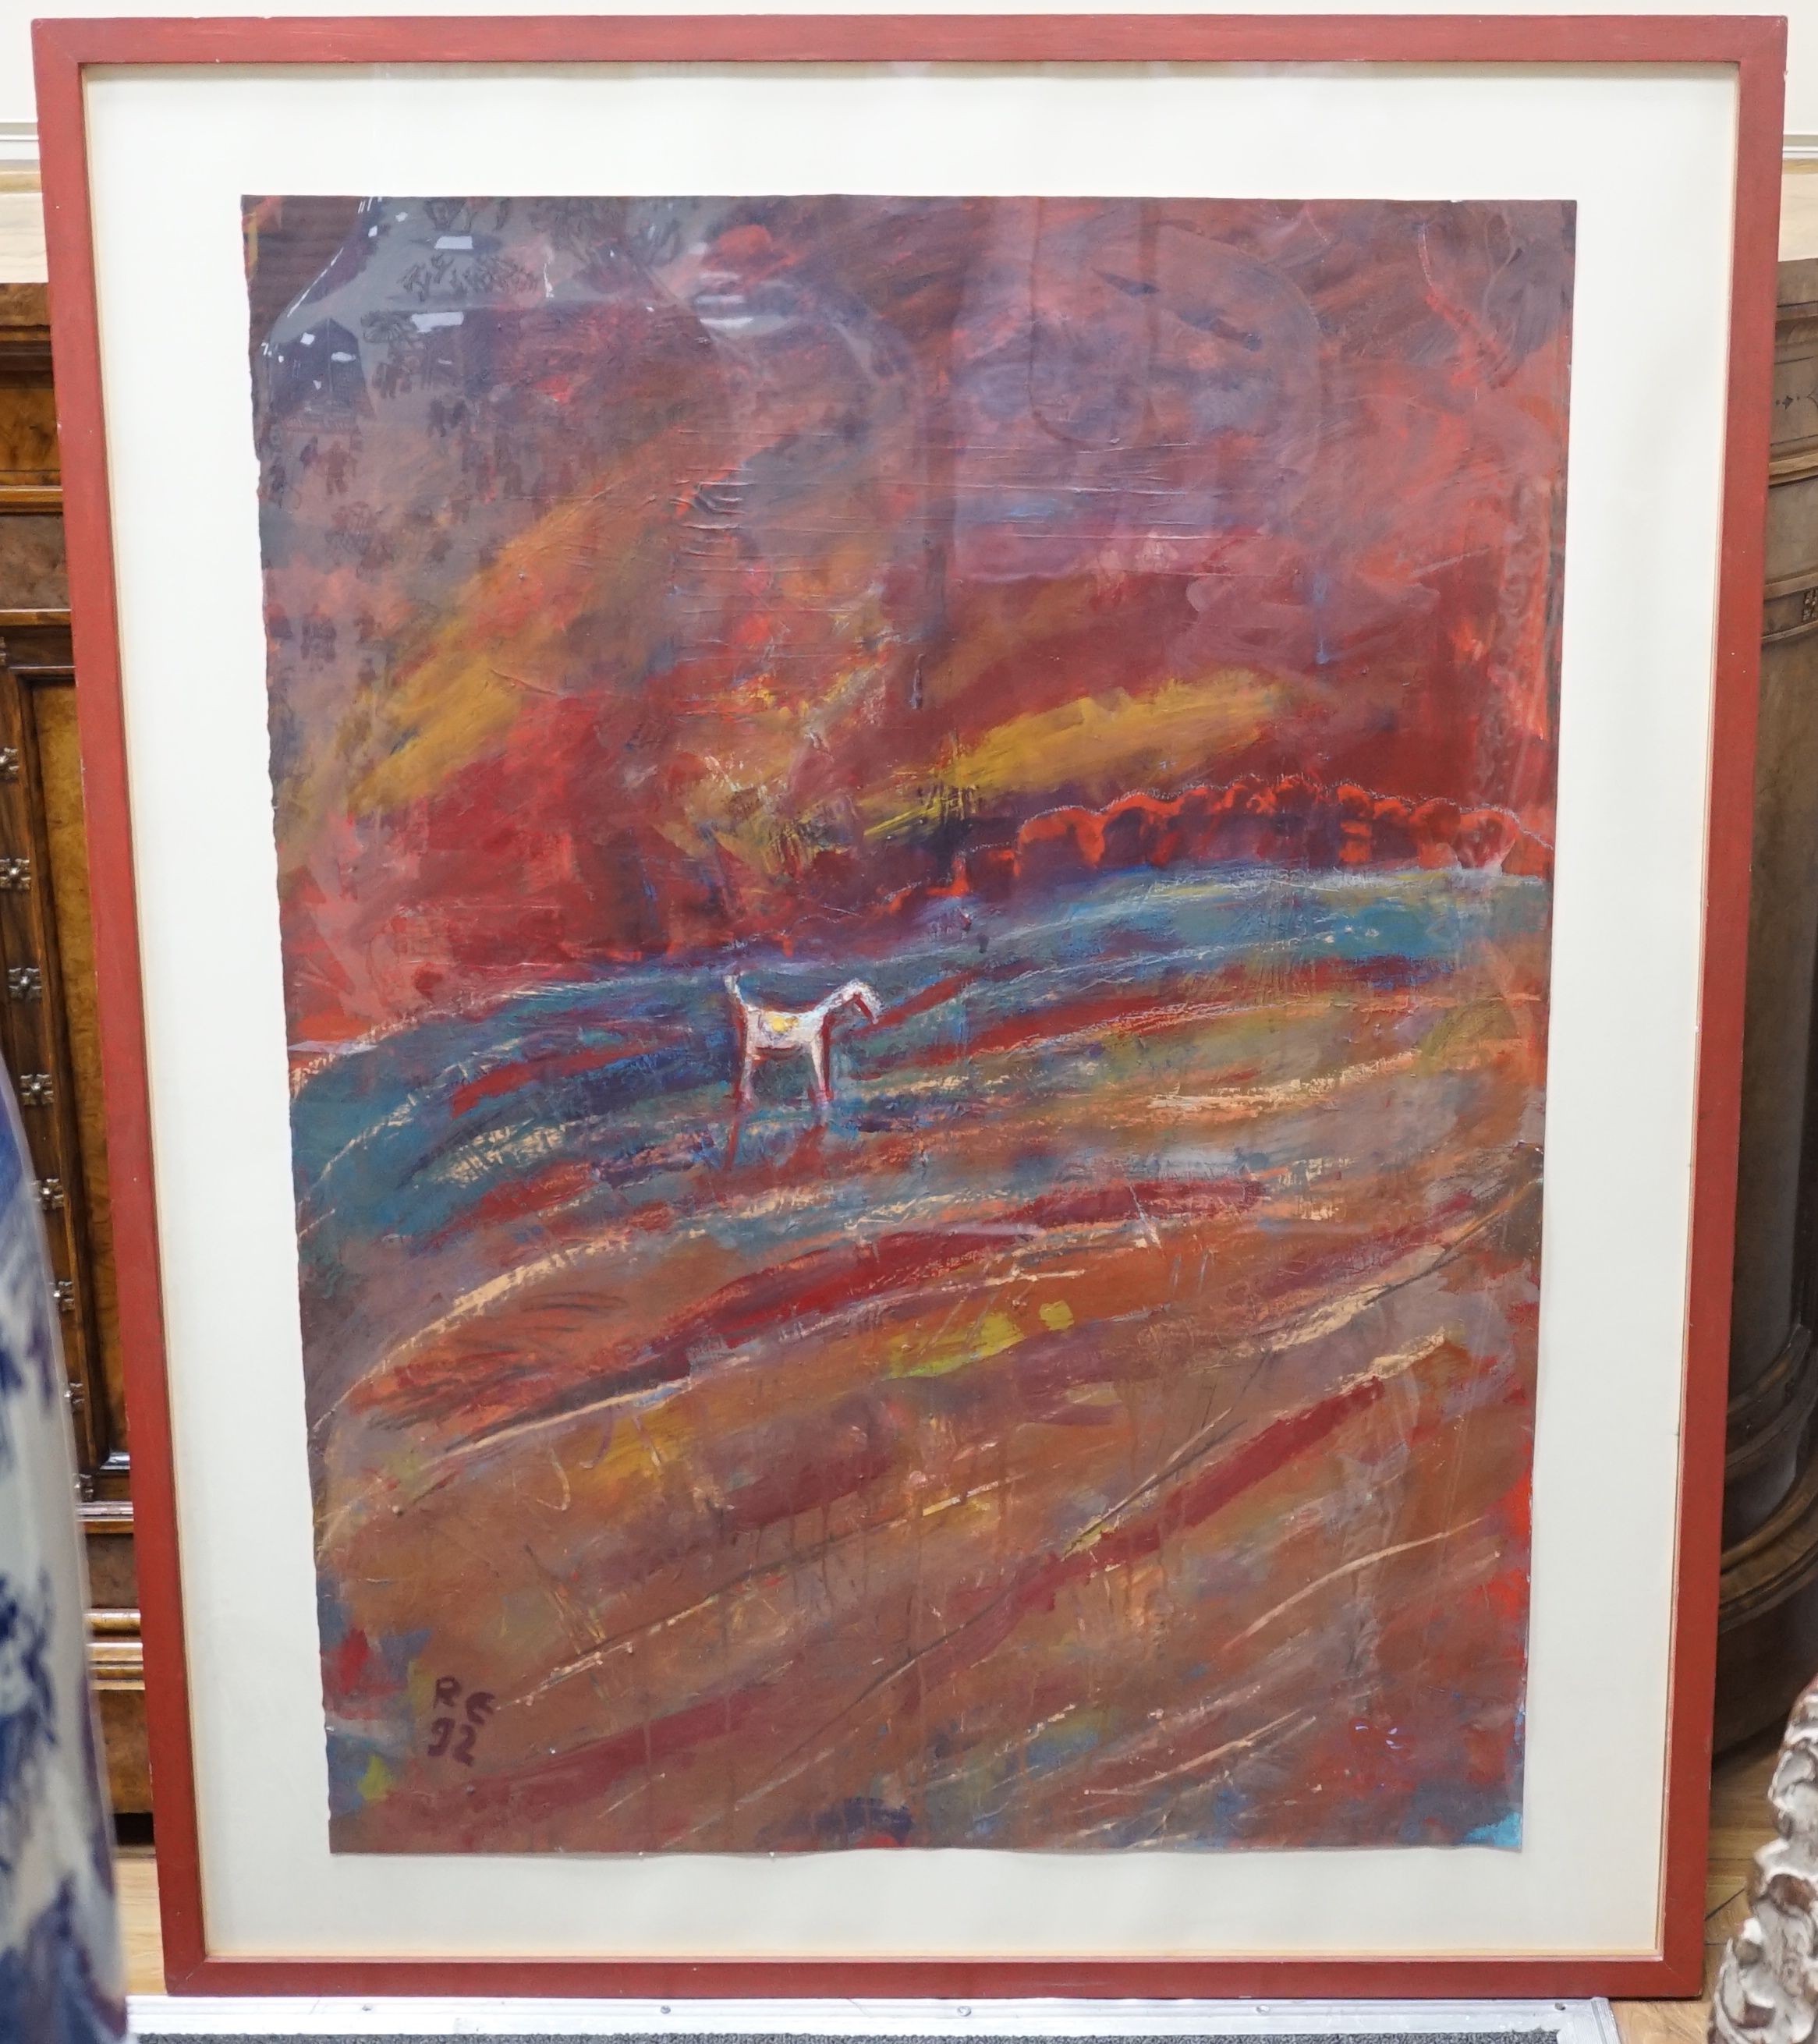 Richard Elliot, oil on paper, abstract horse in a landscape, signed and dated 92, image 89 cm x 65.5 cm